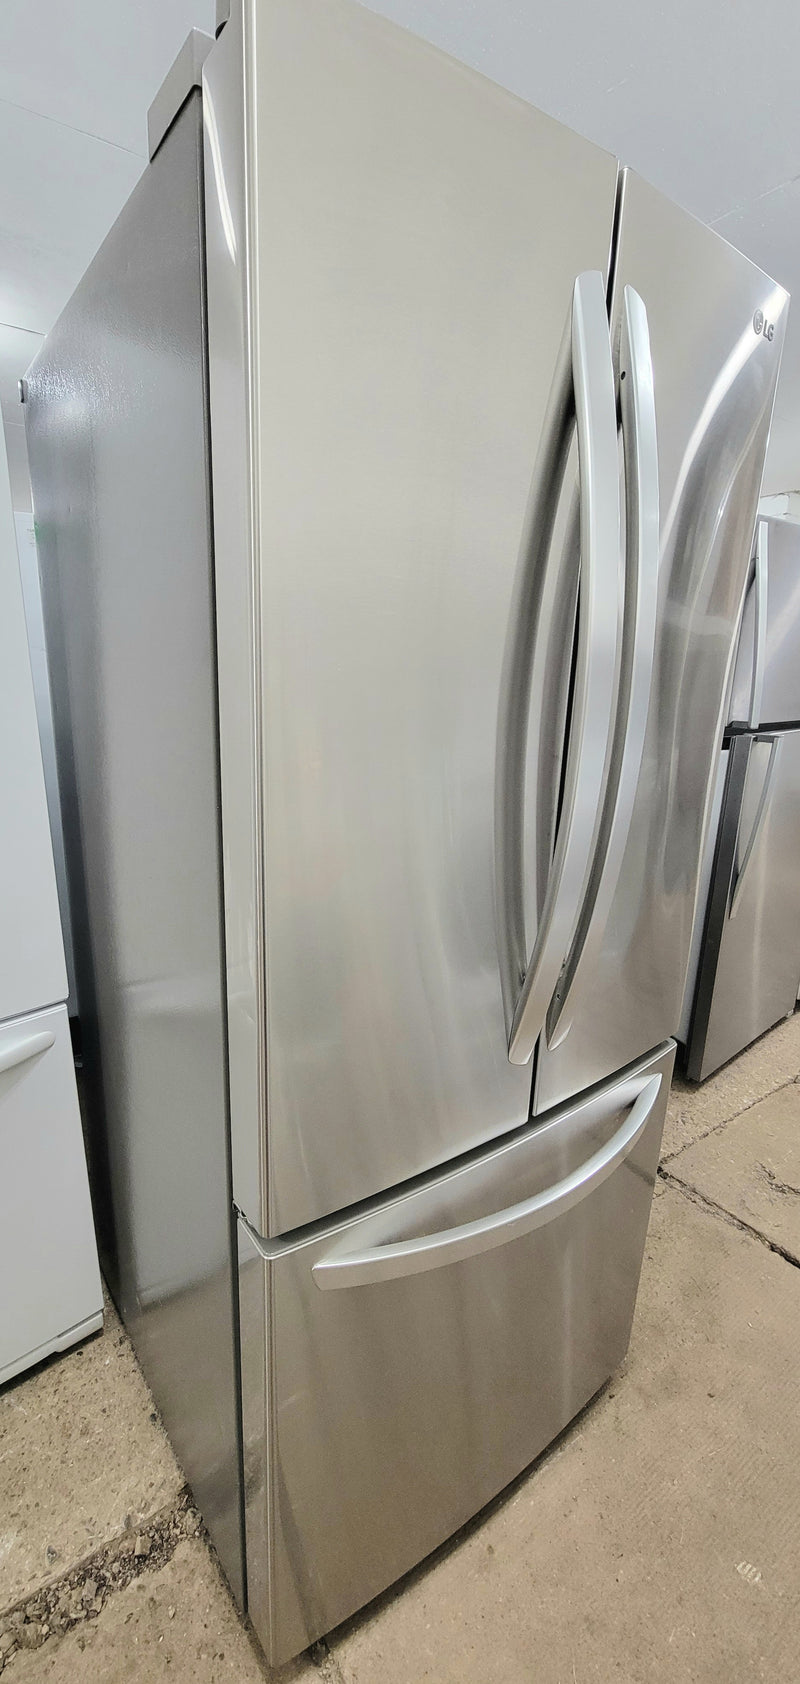 LG 30" Wide Stainless Steal French Door Fridge with Ice Maker, Free 60 Day Warranty